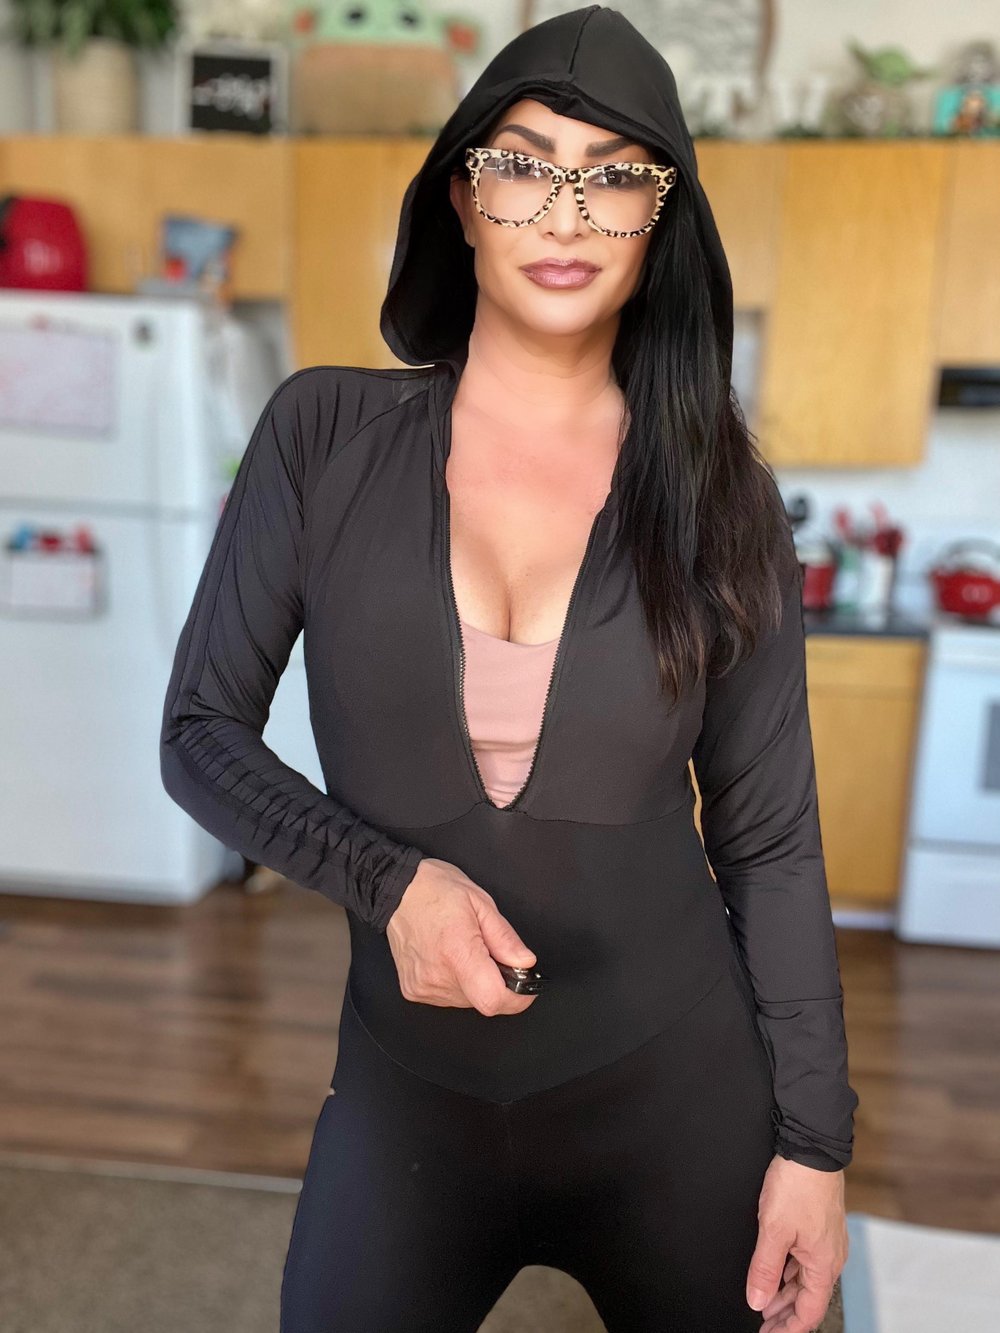 Worn Sexy Black Hooded Athletic Jumpsuit + Free Signed 8X10